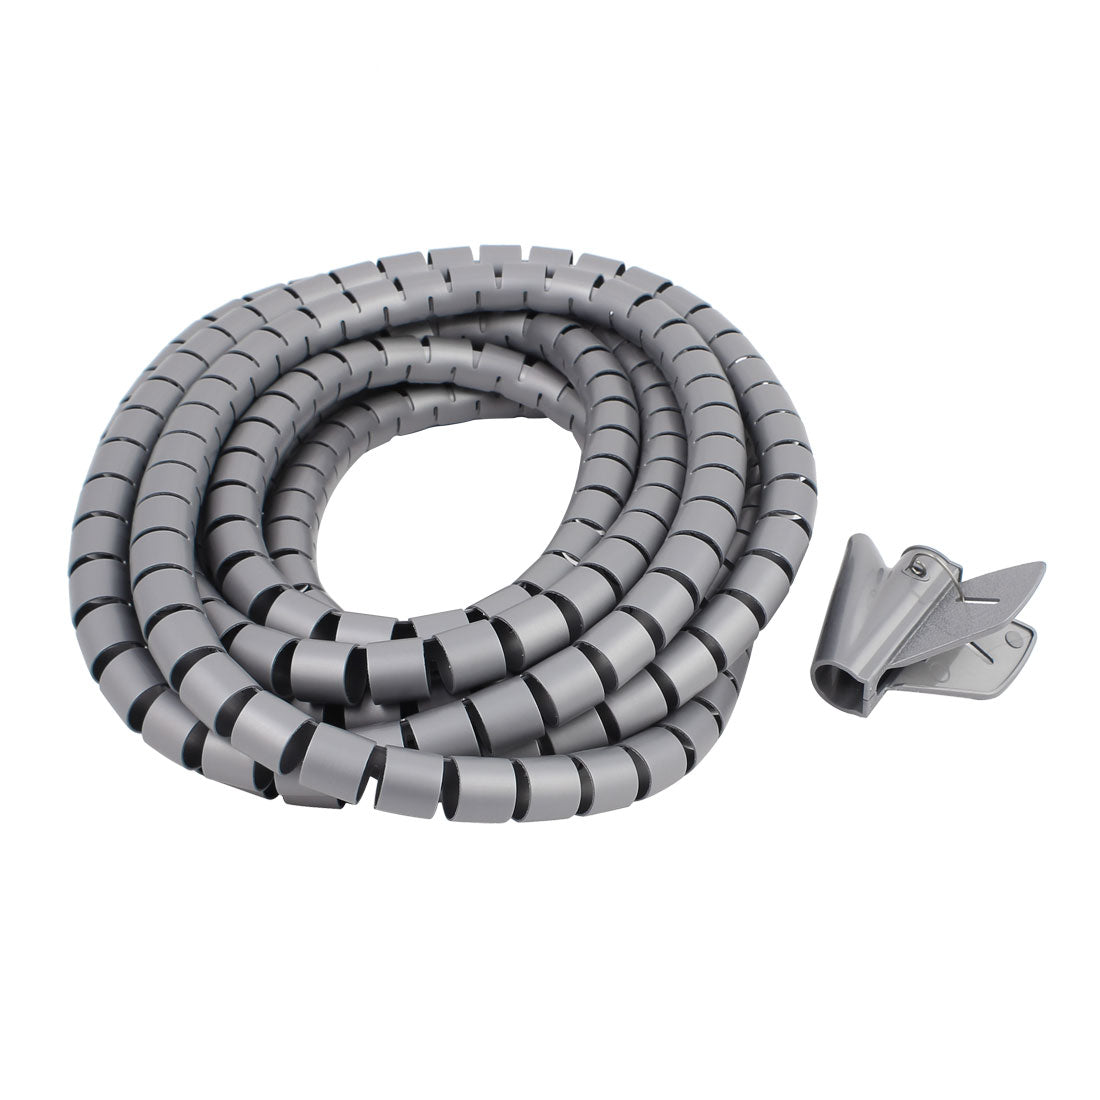 uxcell Uxcell 20mm Flexible Spiral Tube Cable Wire Wrap Computer Manage Cord Gray 5M w Clip